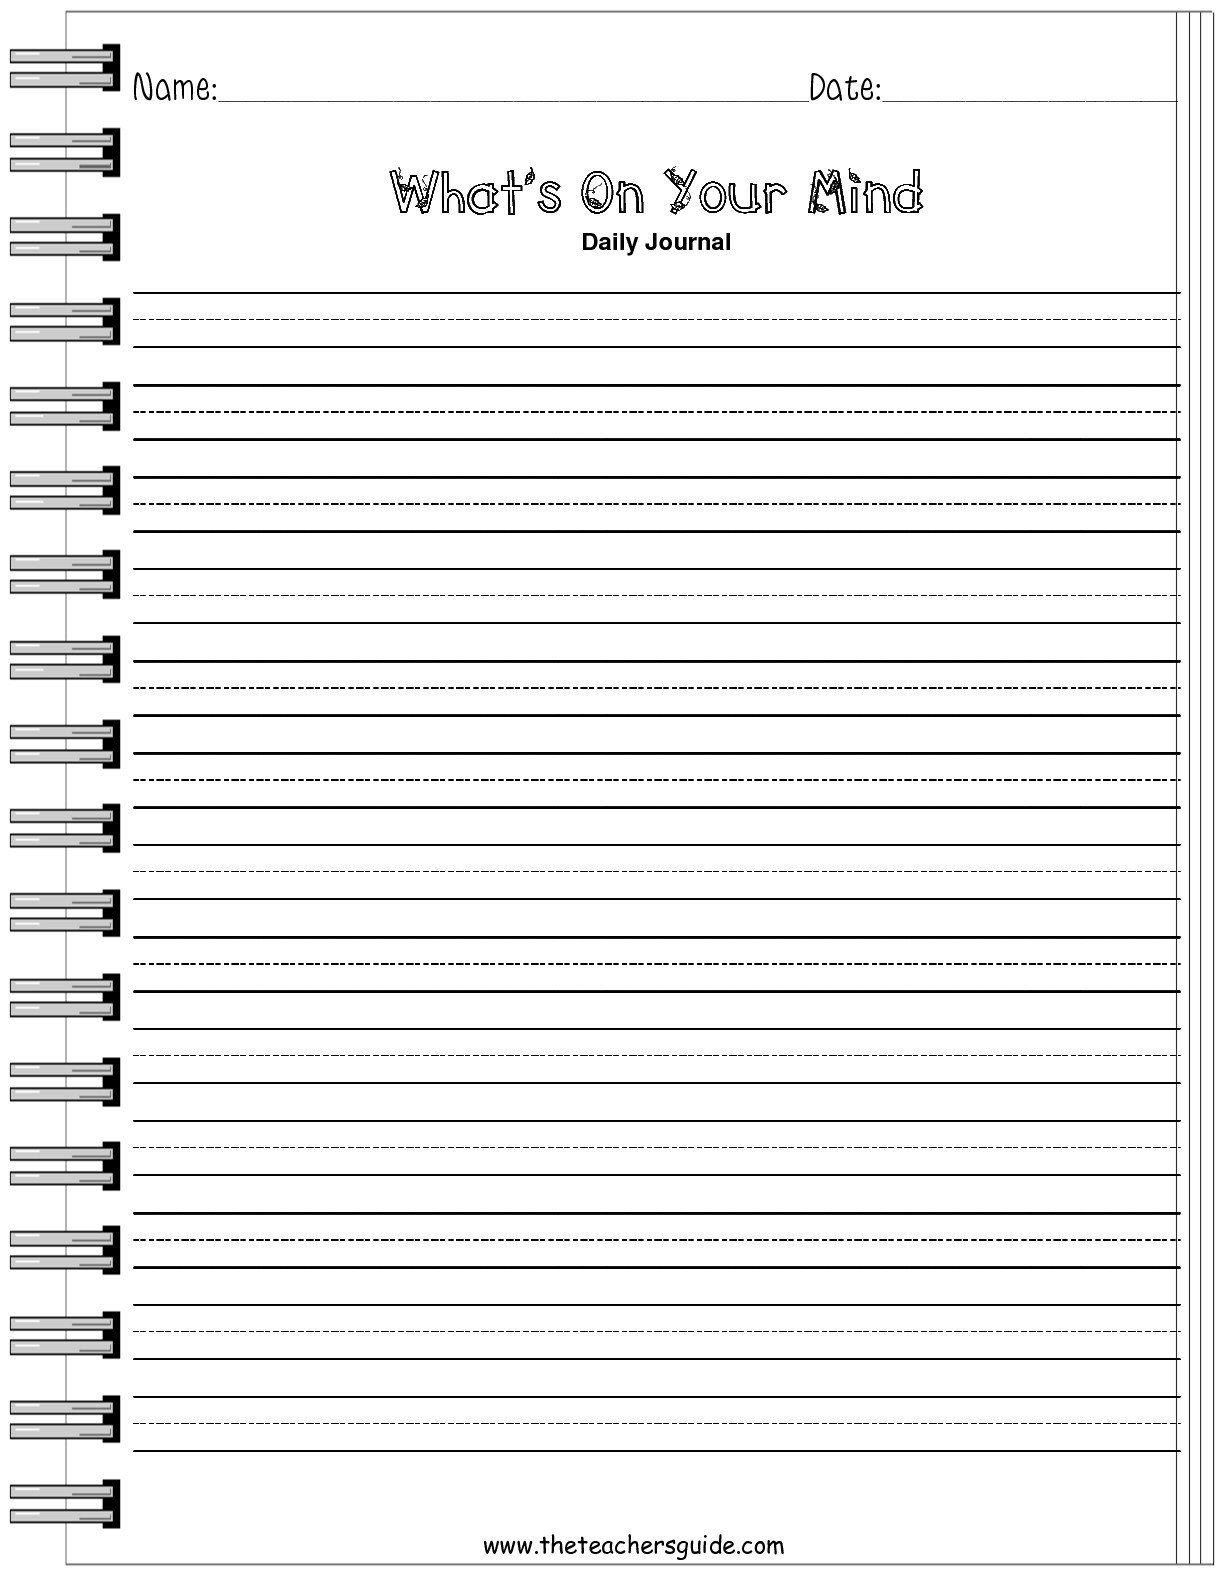 Diary Entry Template for Students Writing Prompt Worksheets From the Teacher S Guide